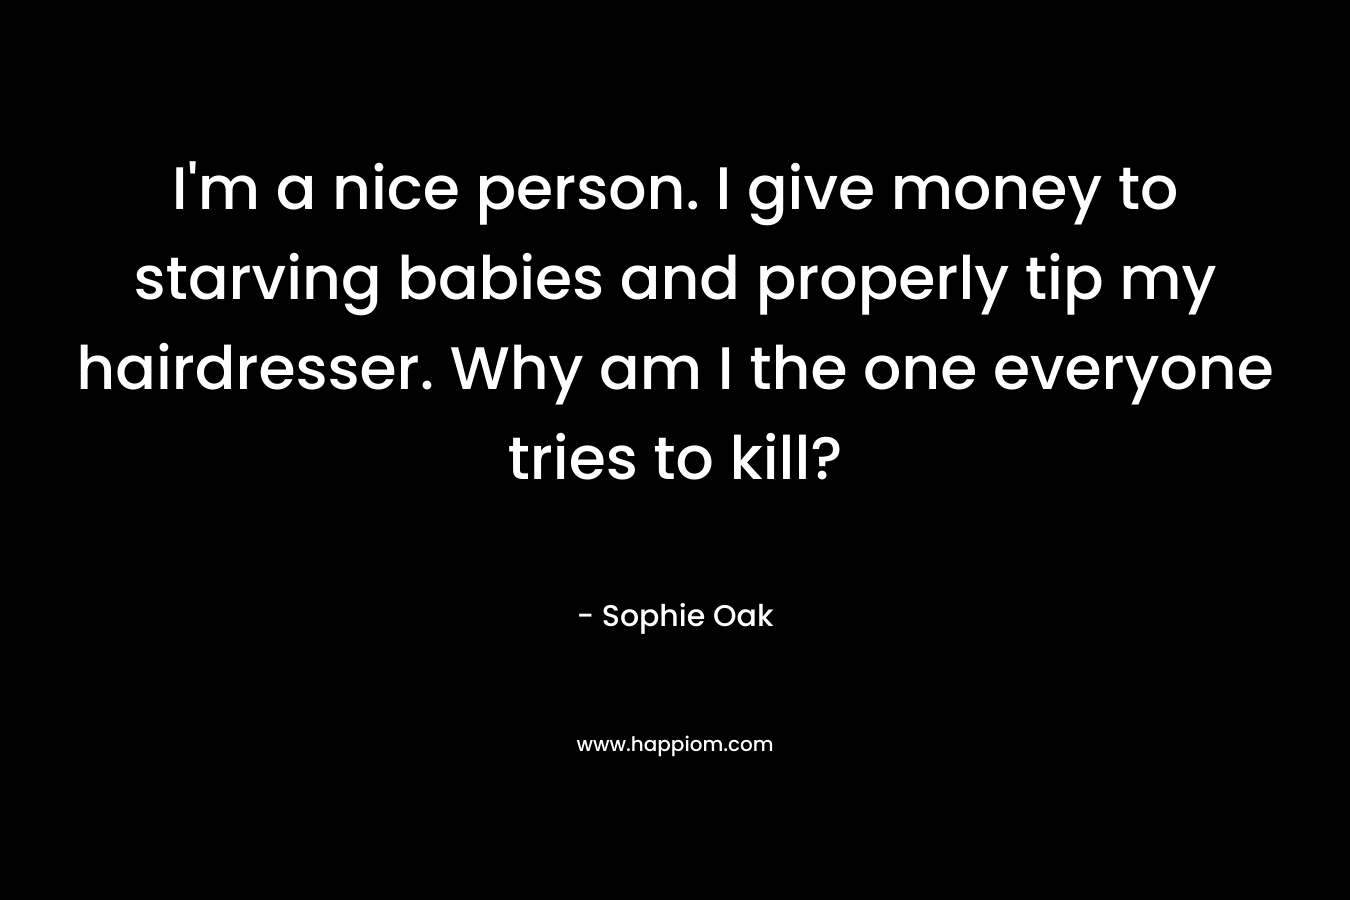 I’m a nice person. I give money to starving babies and properly tip my hairdresser. Why am I the one everyone tries to kill? – Sophie Oak